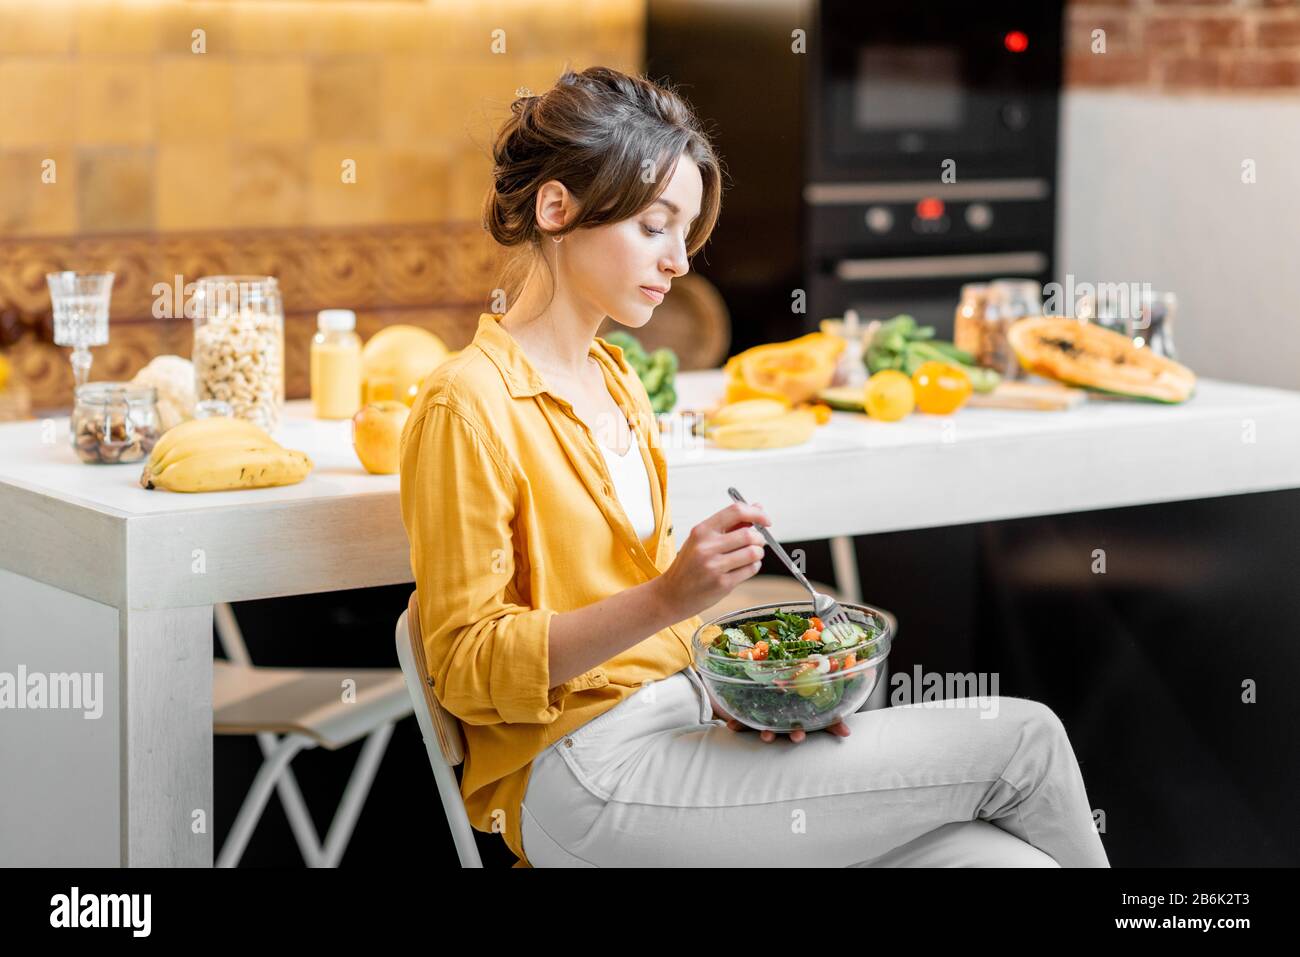 Young and cheerful woman eating salad at the table full of healthy raw vegetables and fruits on the kitchen at home. Concept of vegetarianism, healthy eating and wellness Stock Photo